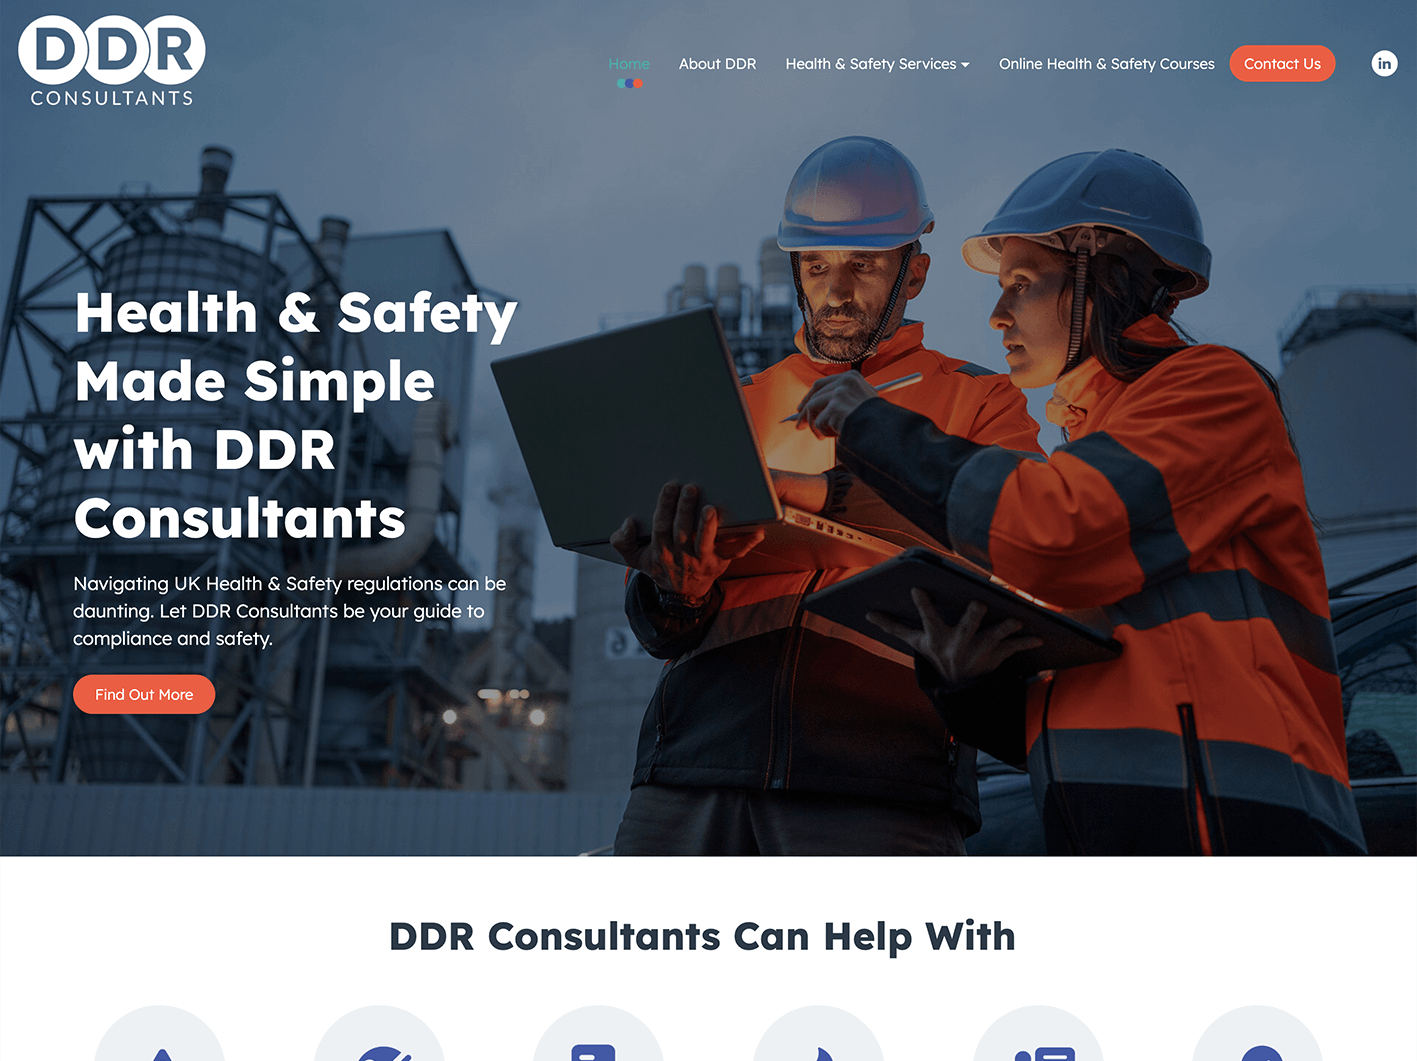 DDR Consultants Website